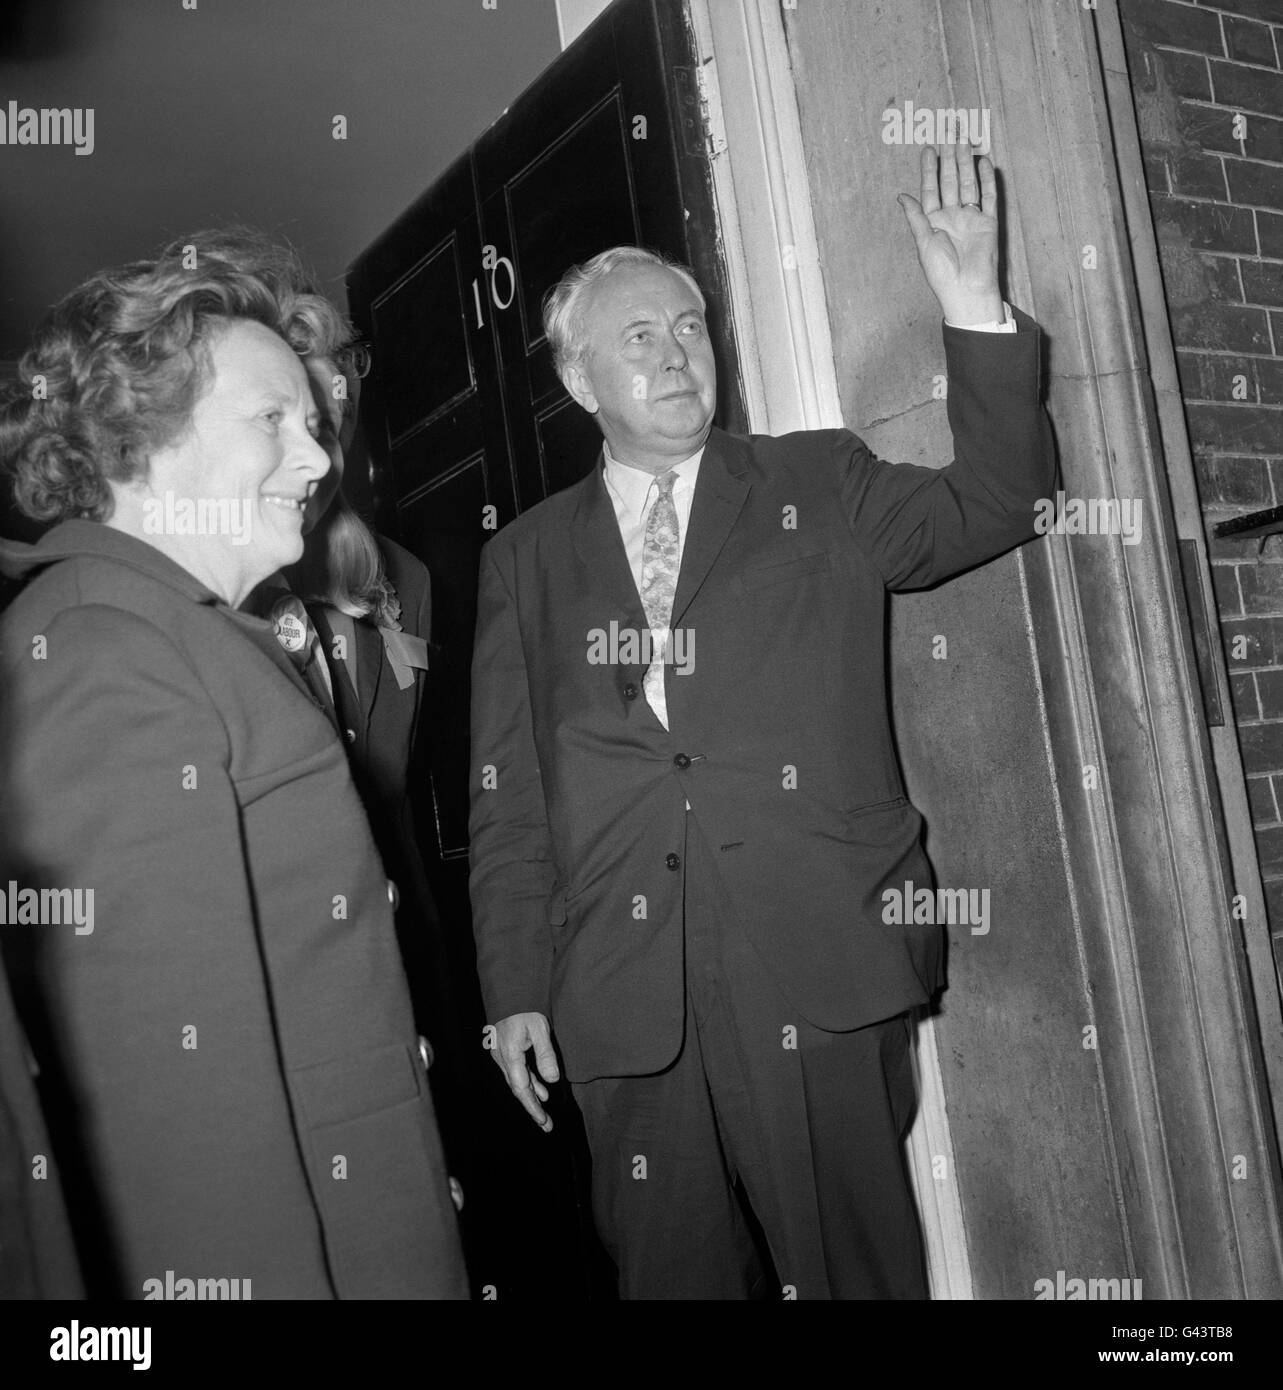 Prime Minister Harold Wilson waves as he arrives back at No. 10 Downing Street after travelling through the night from his Huyton constituency. As the overnight General Election results showed probable defeat for Labour, Mr Wilson was greeted by about a dozen people in Downing Street. Stock Photo